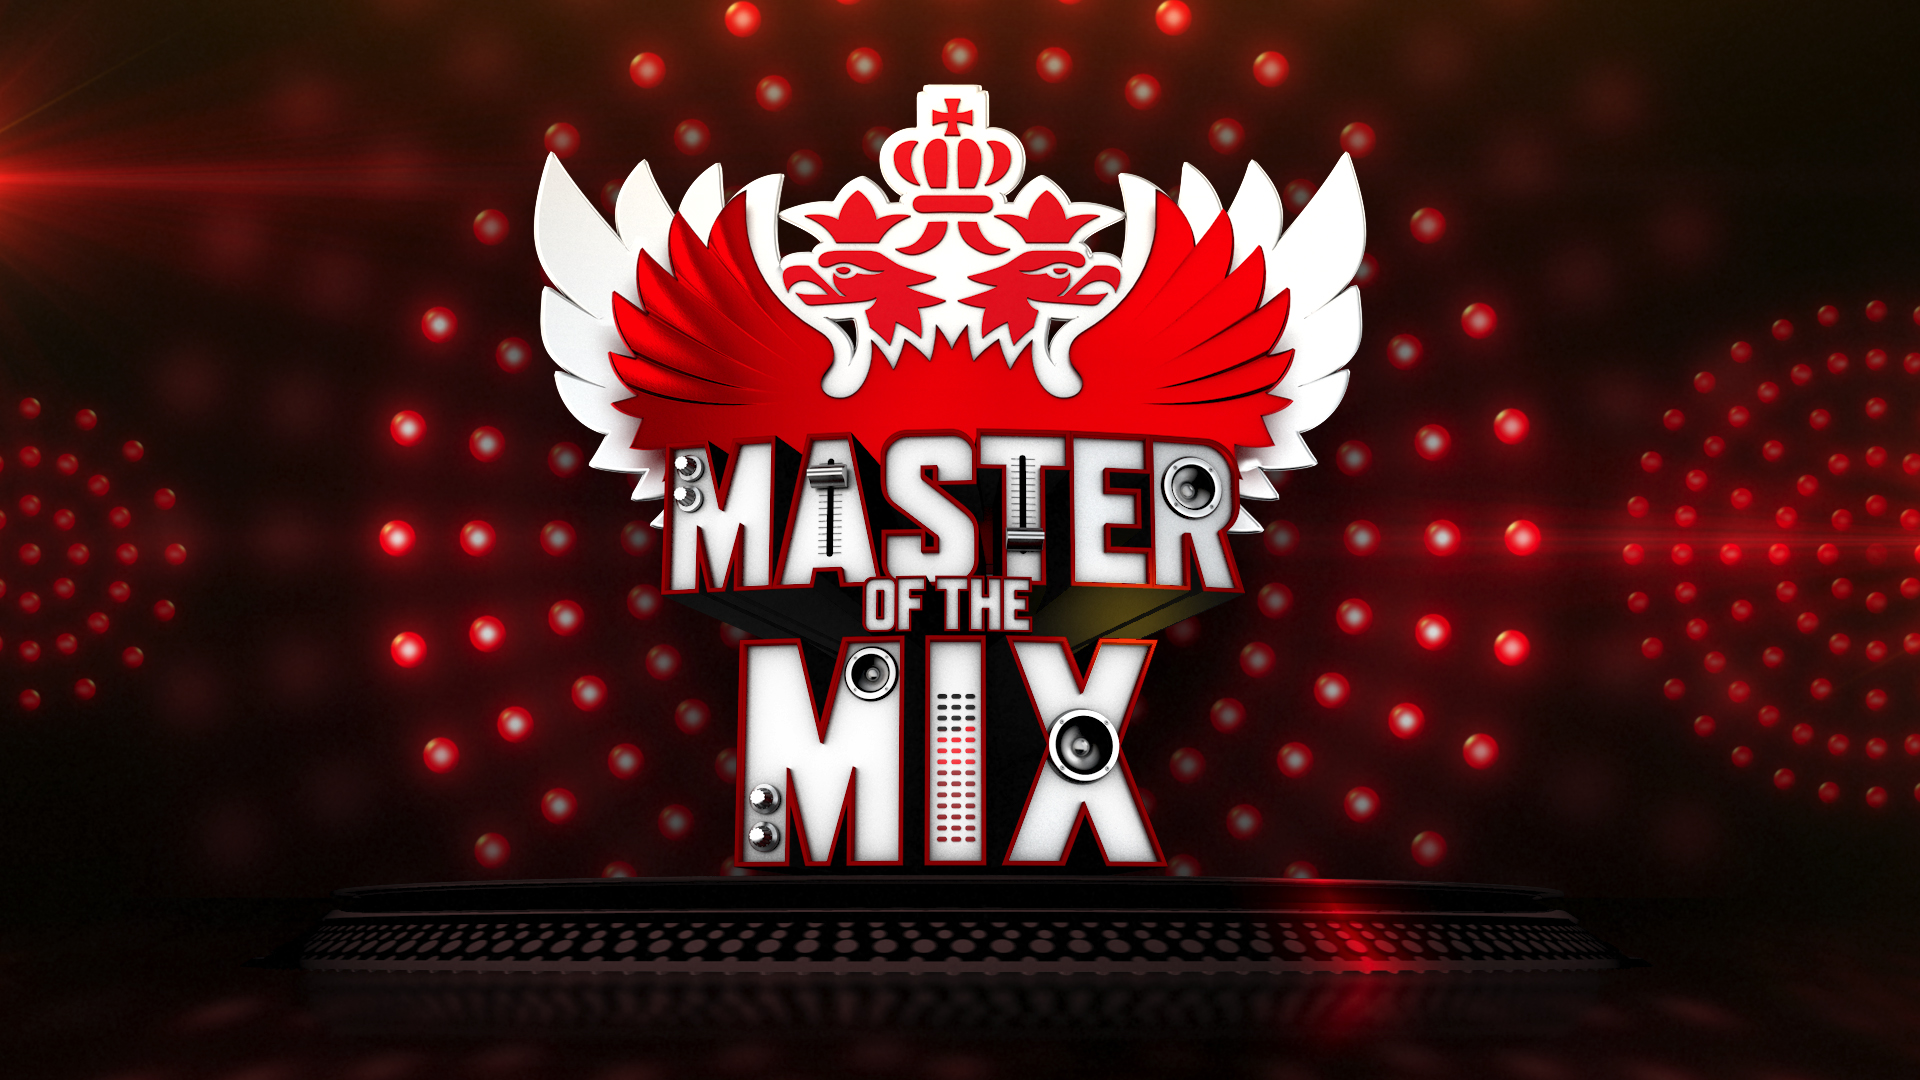 018_VH1 Master Of The Mix.jpg